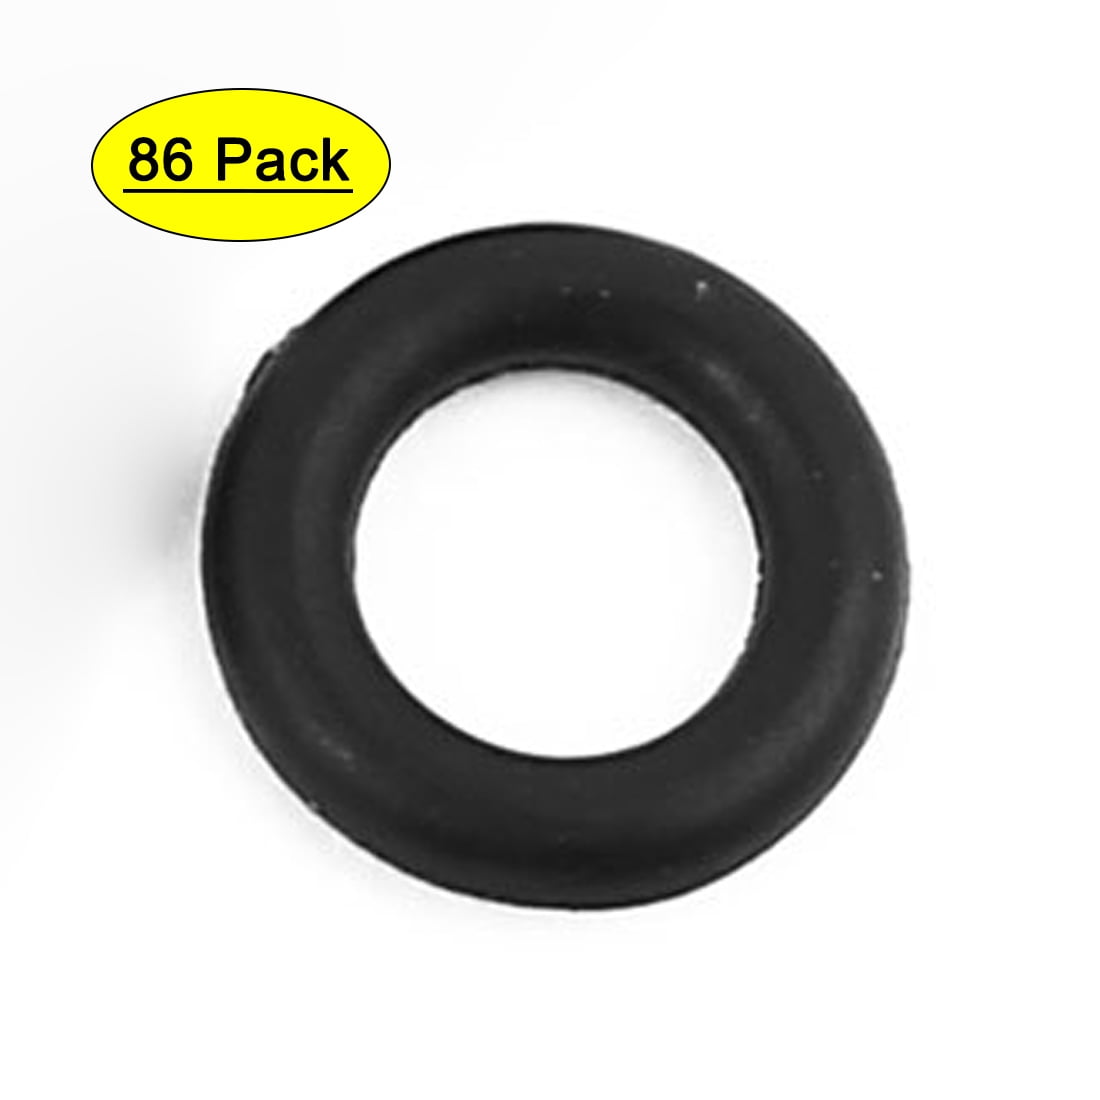 2 x Solid EPDM Rubber Discs 2mm thick pick your own size 